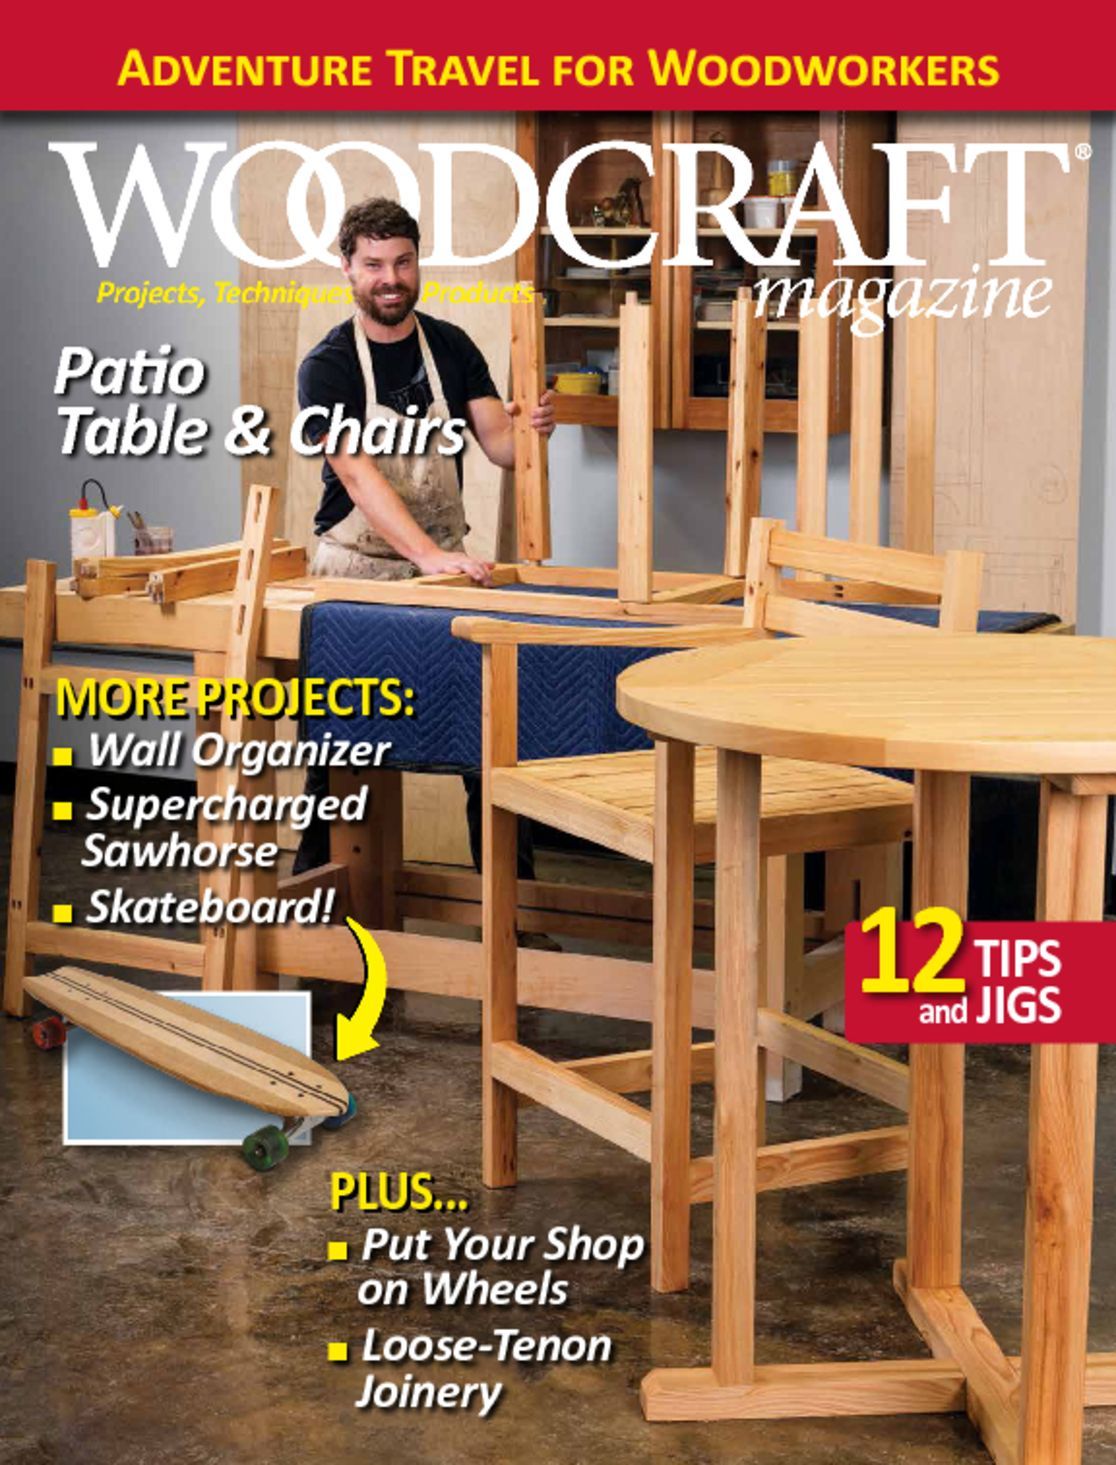 Woodcraft Magazine Projects, Techniques, and Products 